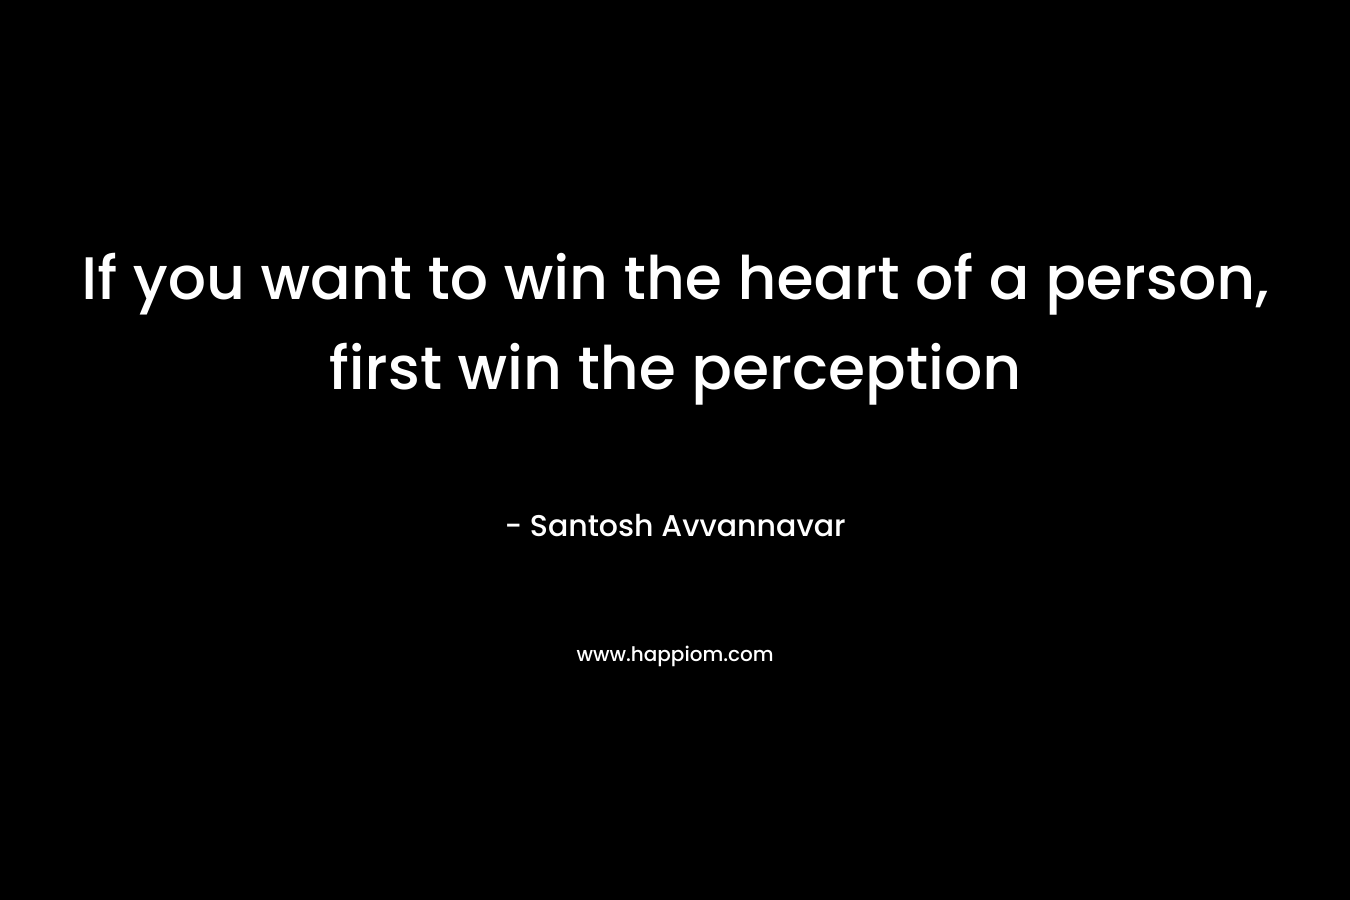 If you want to win the heart of a person, first win the perception